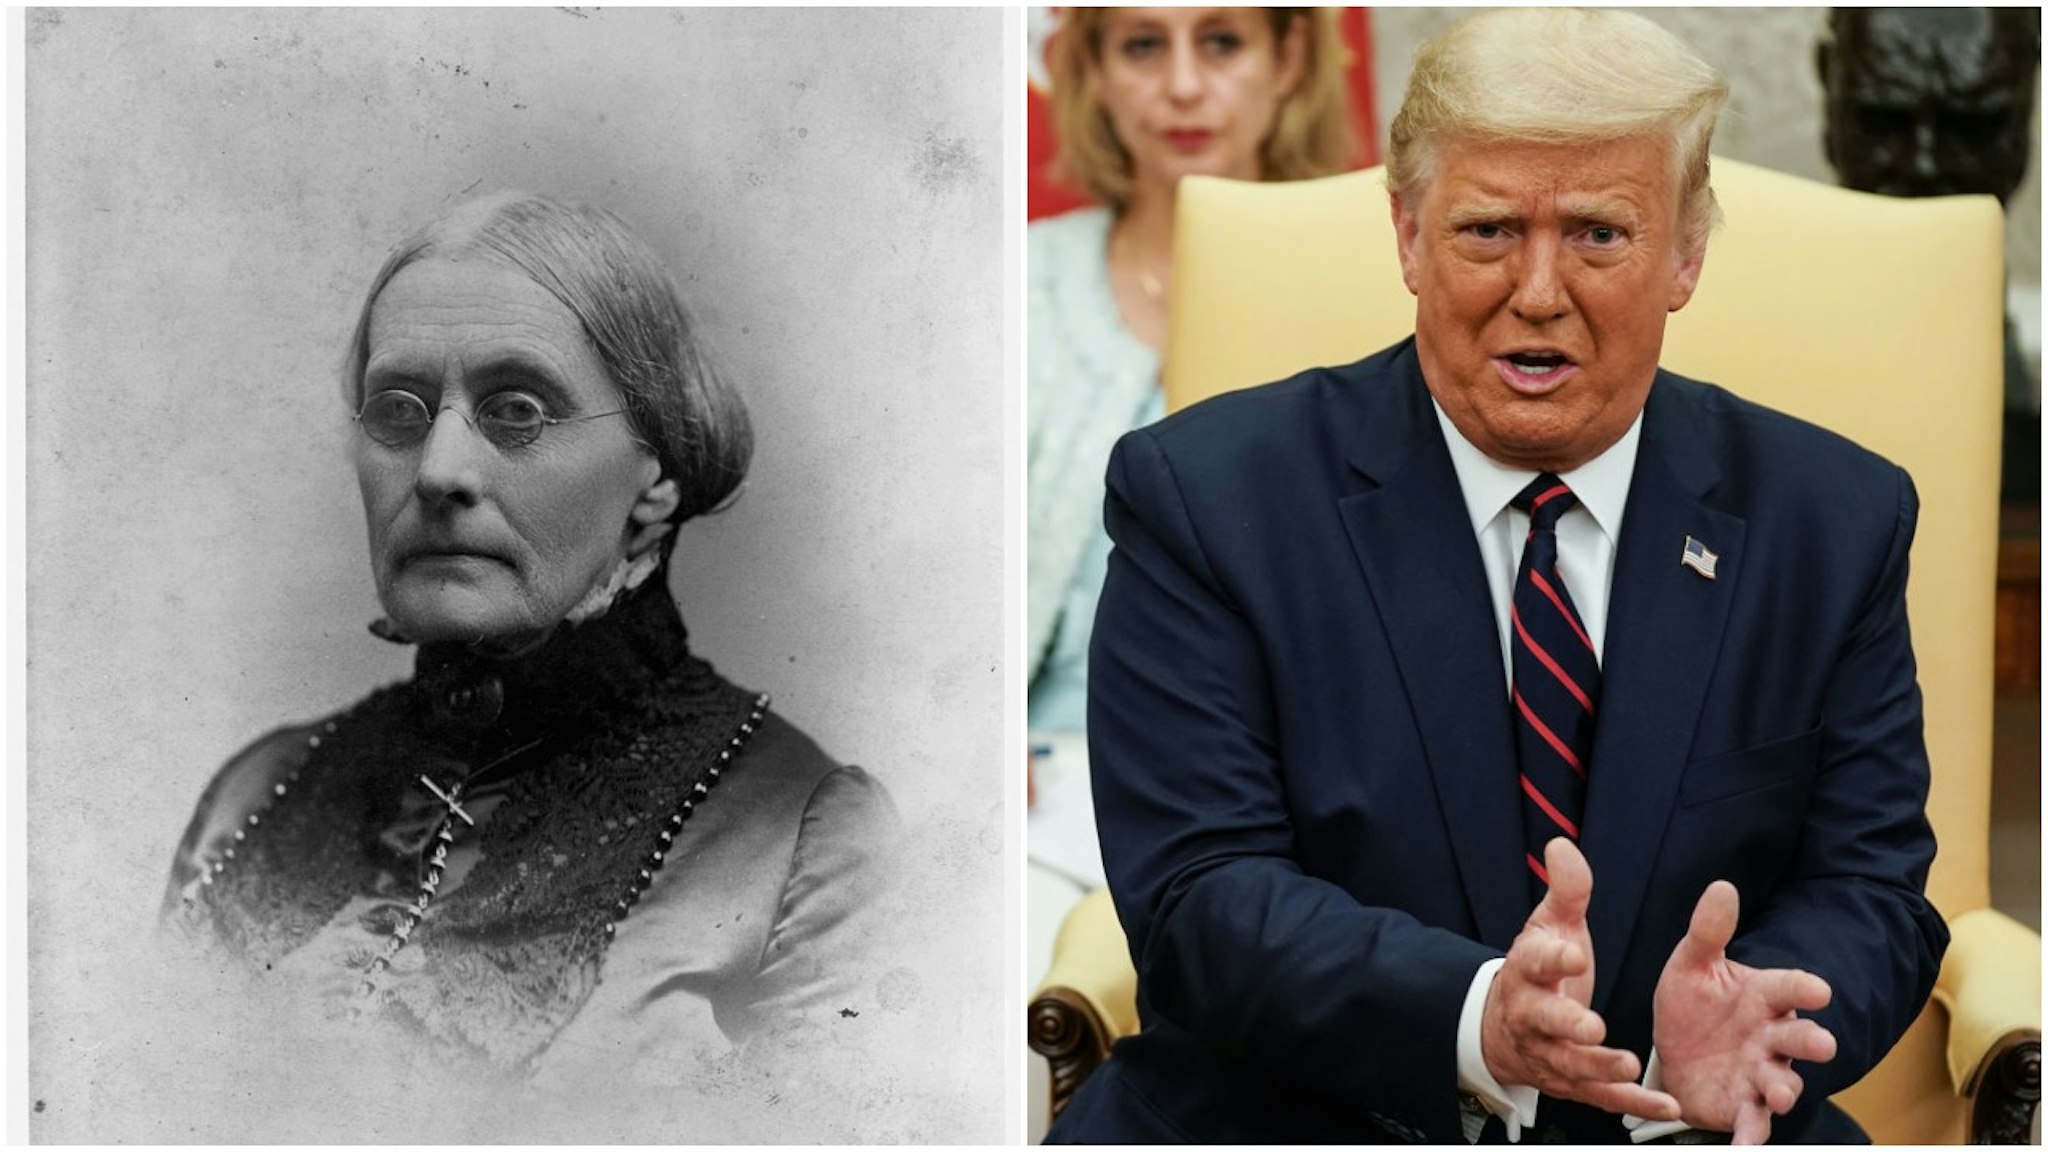 Susan B. Anthony and Trump